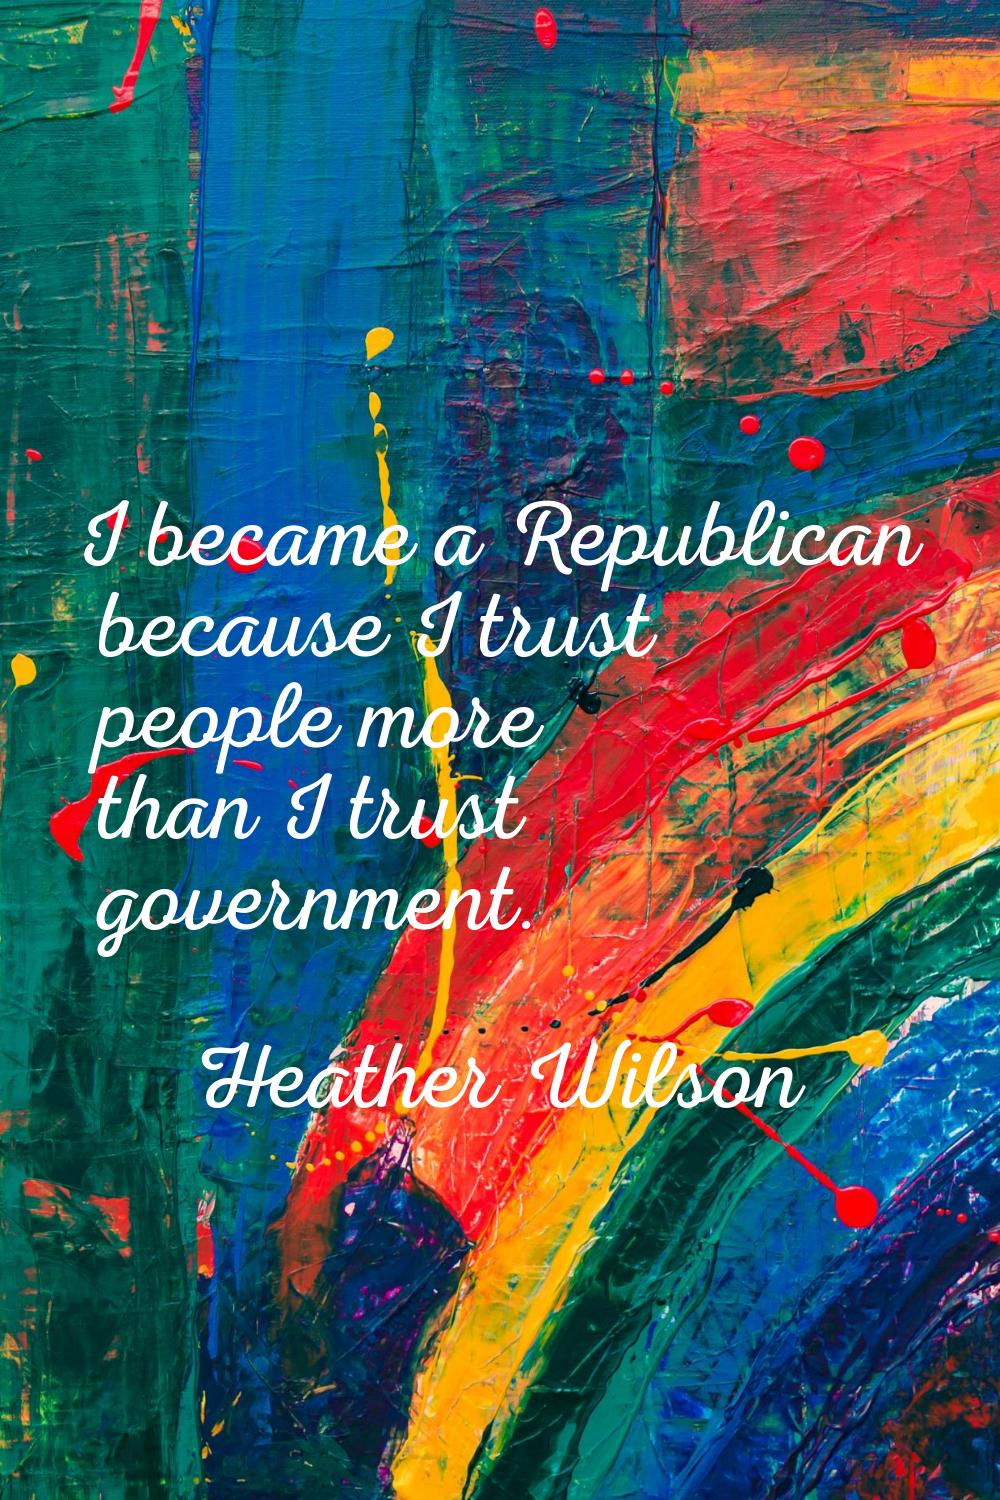 I became a Republican because I trust people more than I trust government.